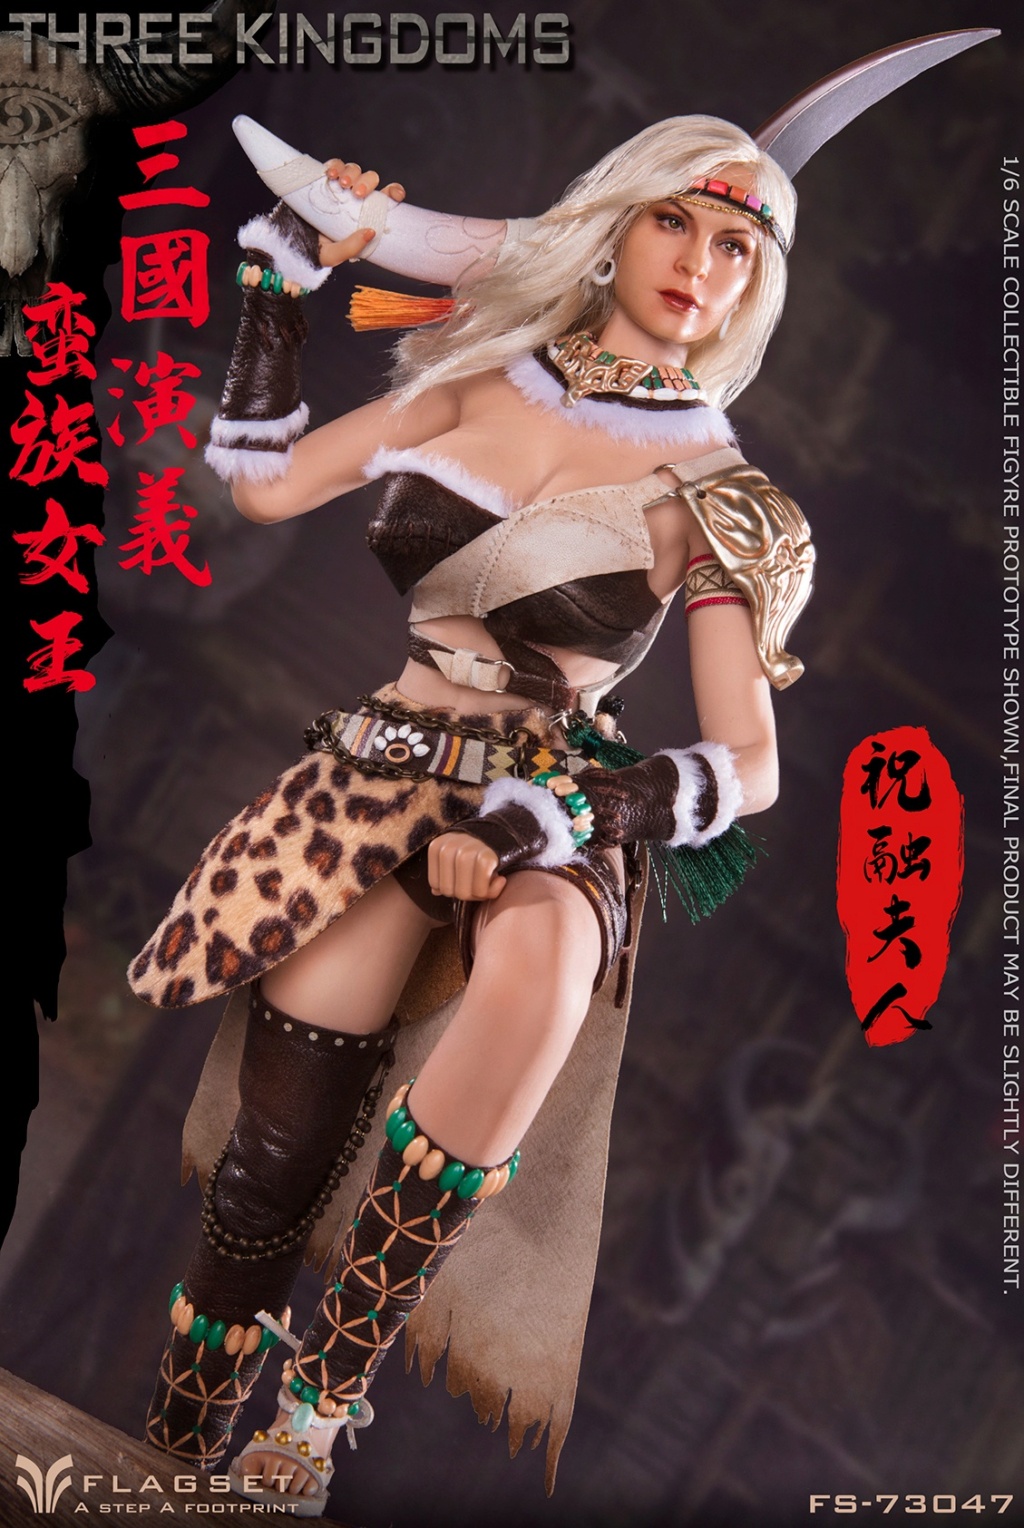 SouthernBarbarian - NEW PRODUCT: FLAGSET: 1/6 Three Kingdoms: Southern Barbarian Female General - Zhu Rong #FS-73047 23323010